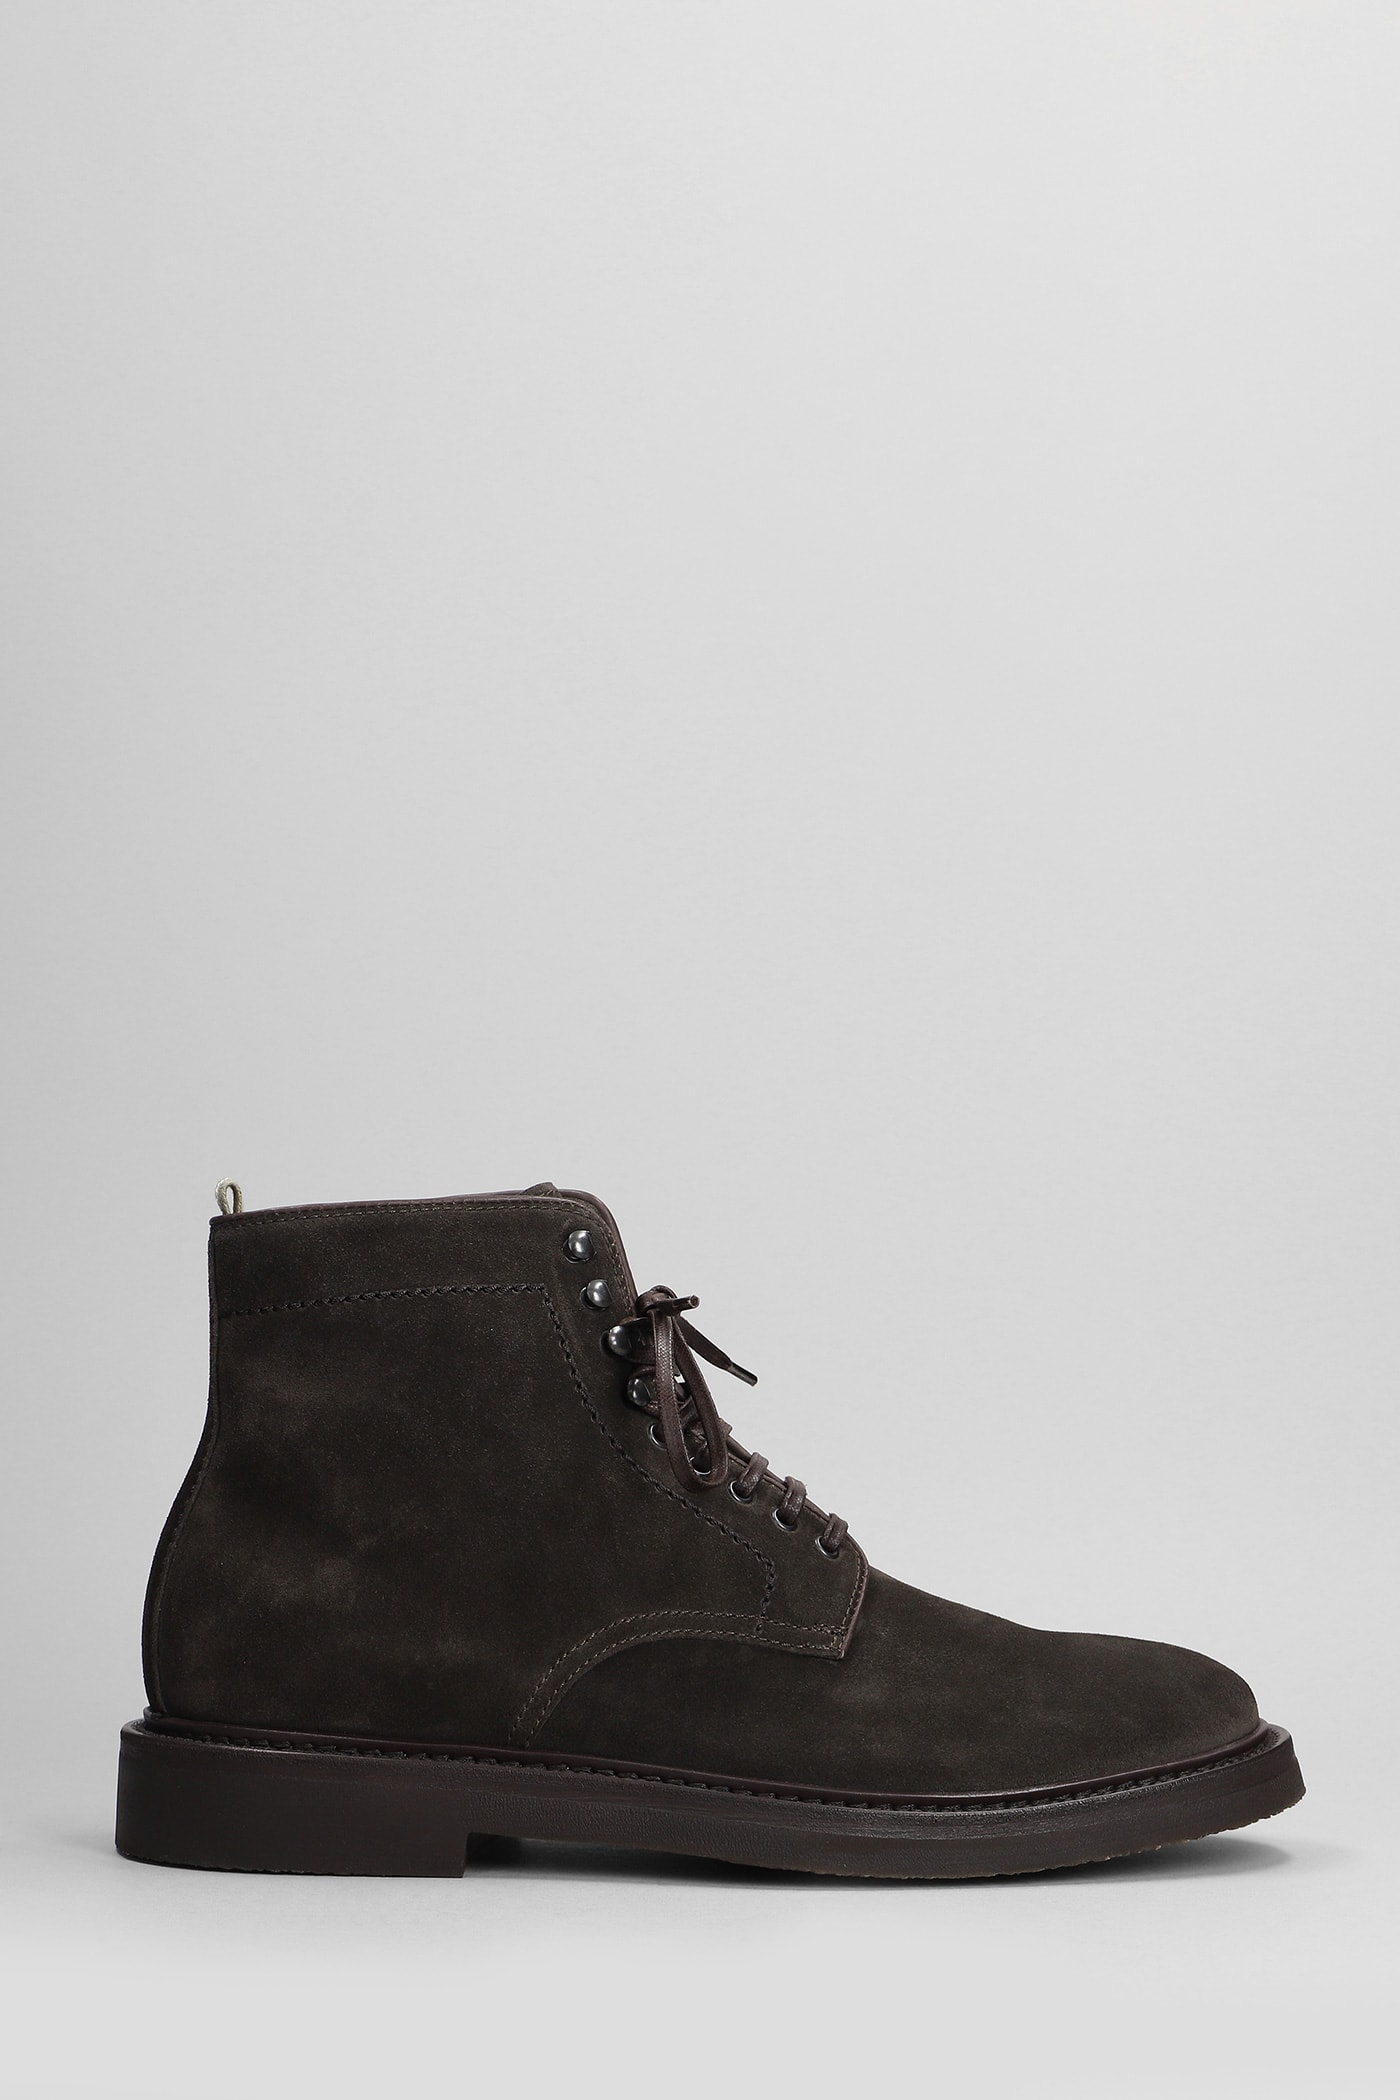 Hopkins Flexi Ankle Boots In Brown Suede